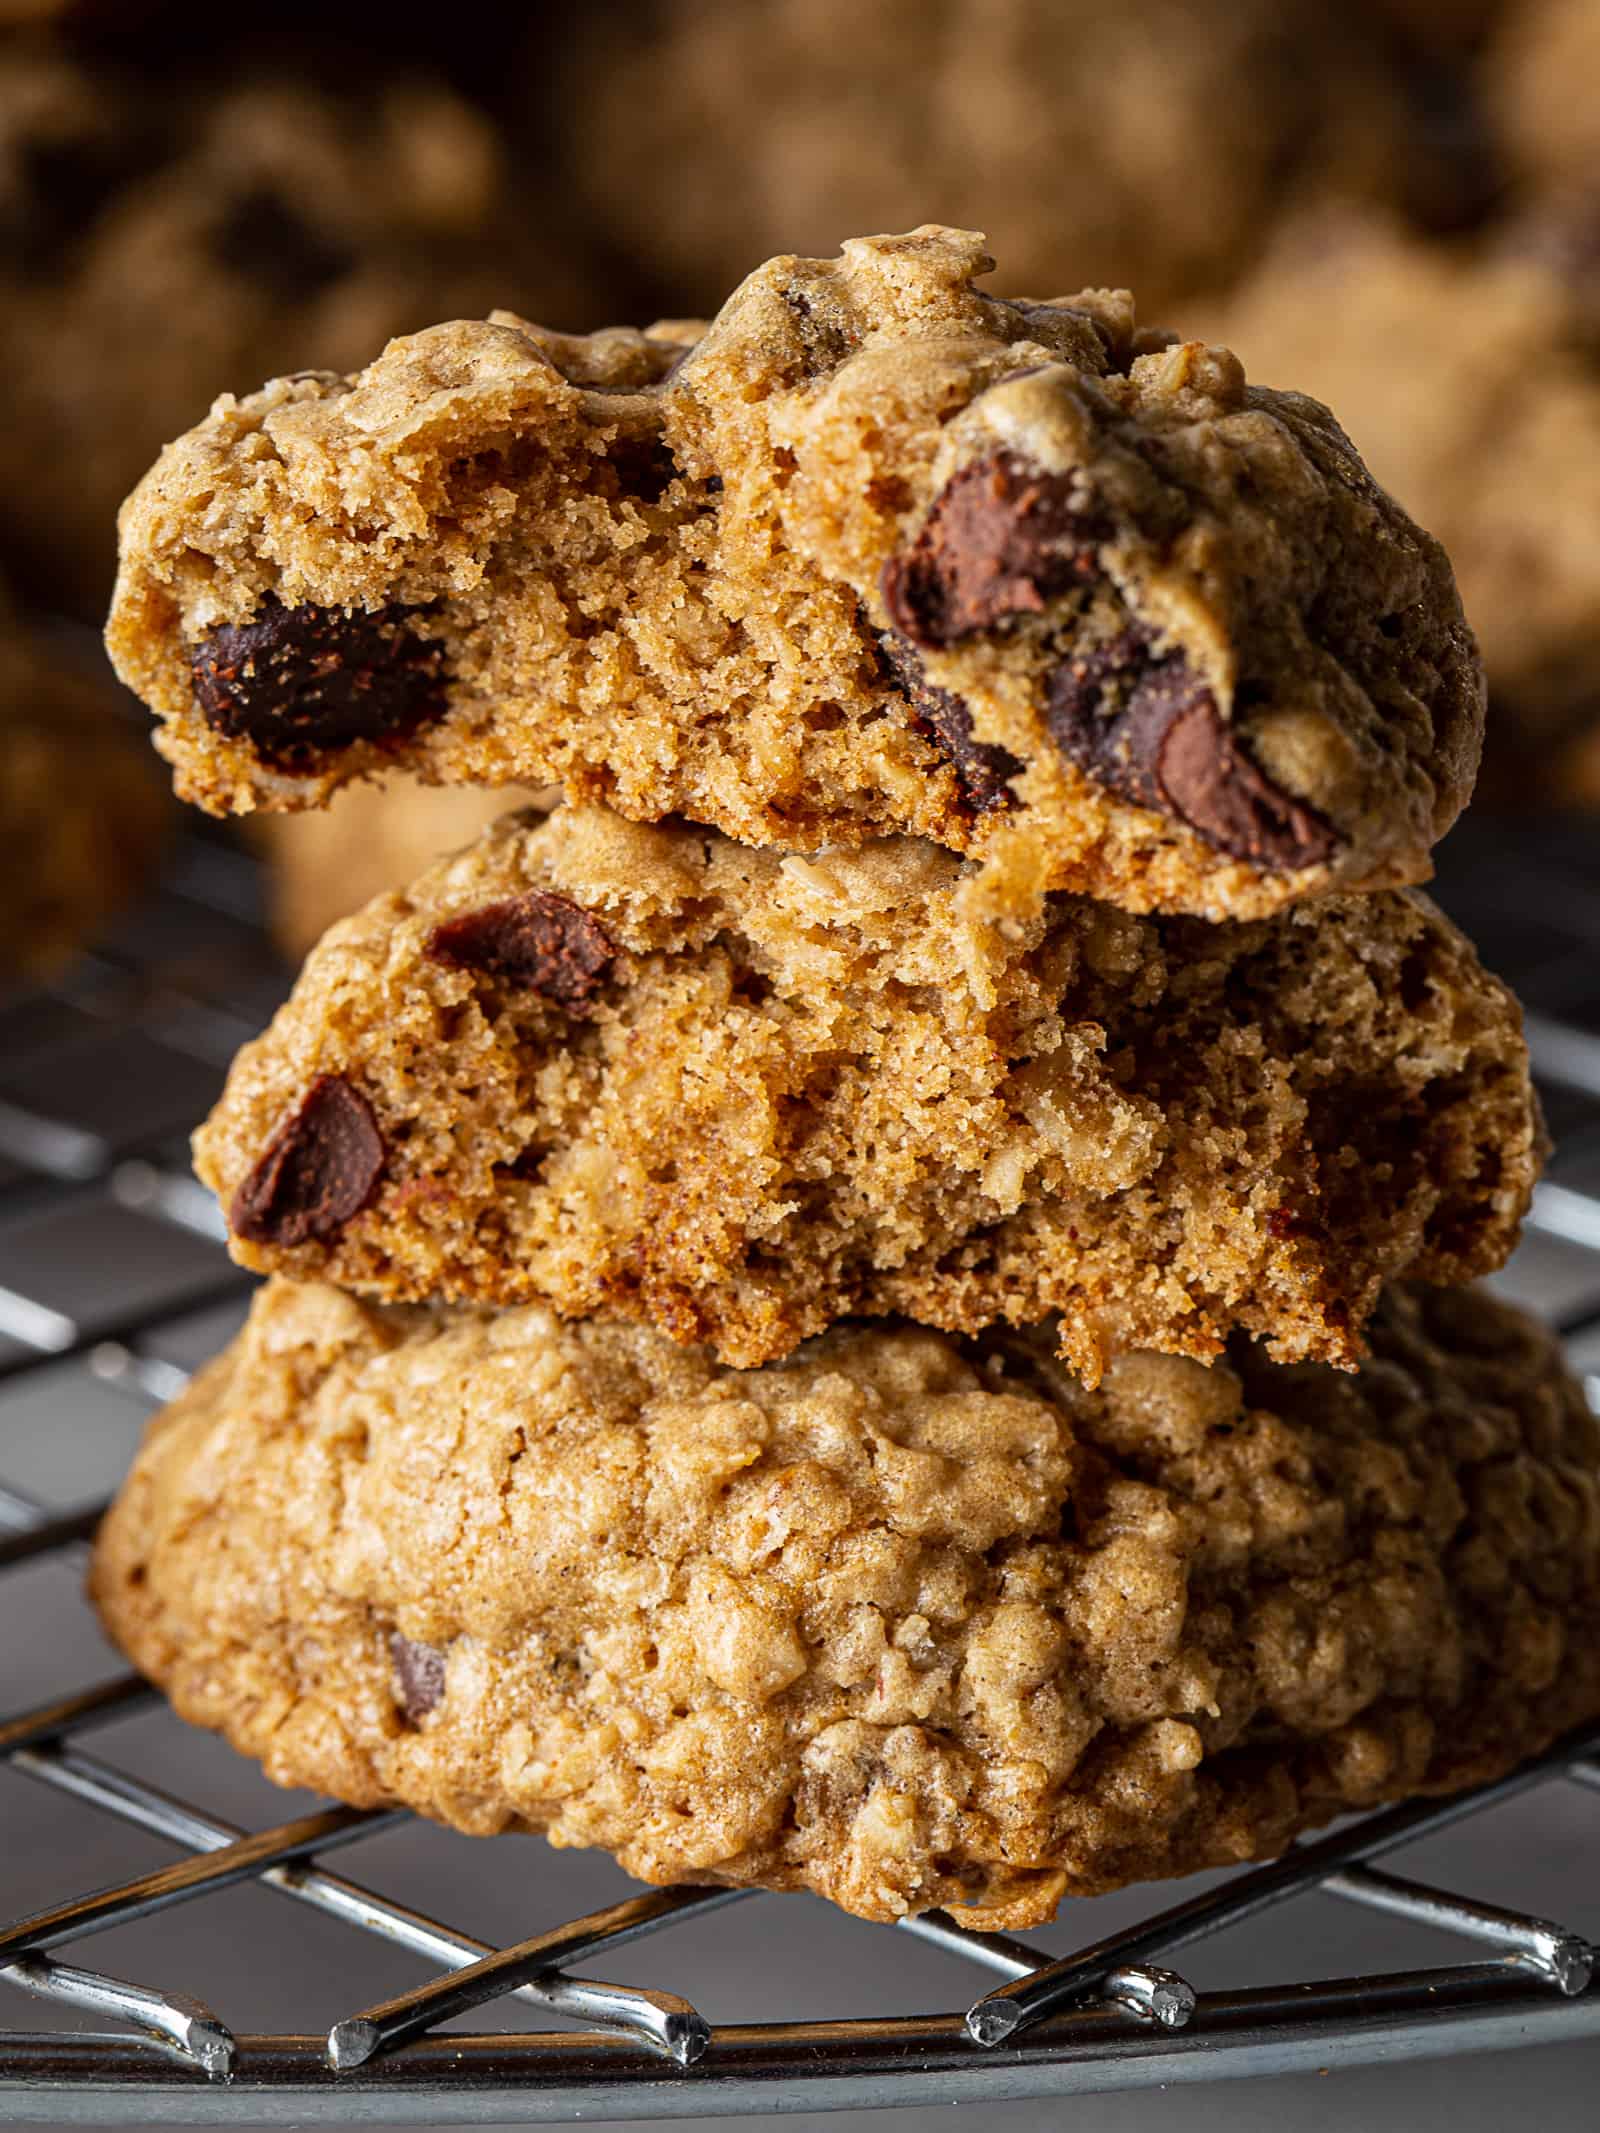 A stack of three gluten-free oatmeal cookies. The top two cookies are broken in half to show the chocolate chips insides.